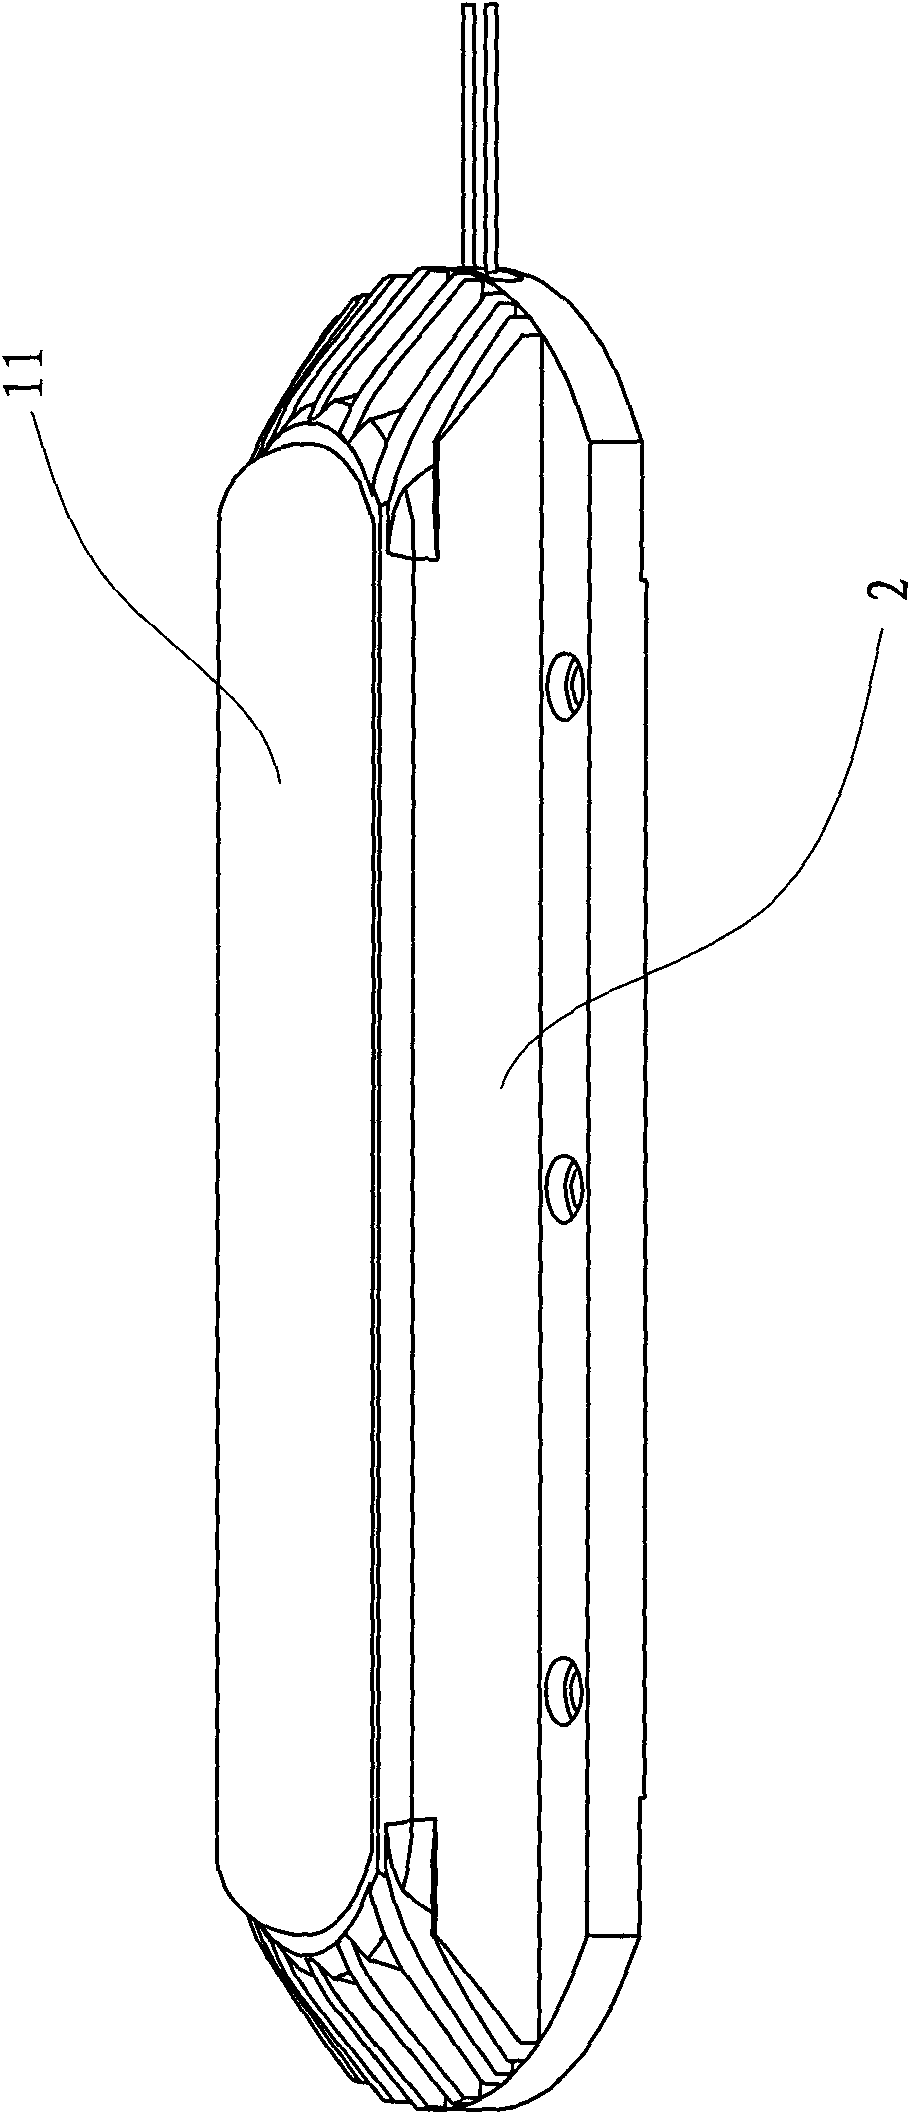 Embedded package structure of LED light source